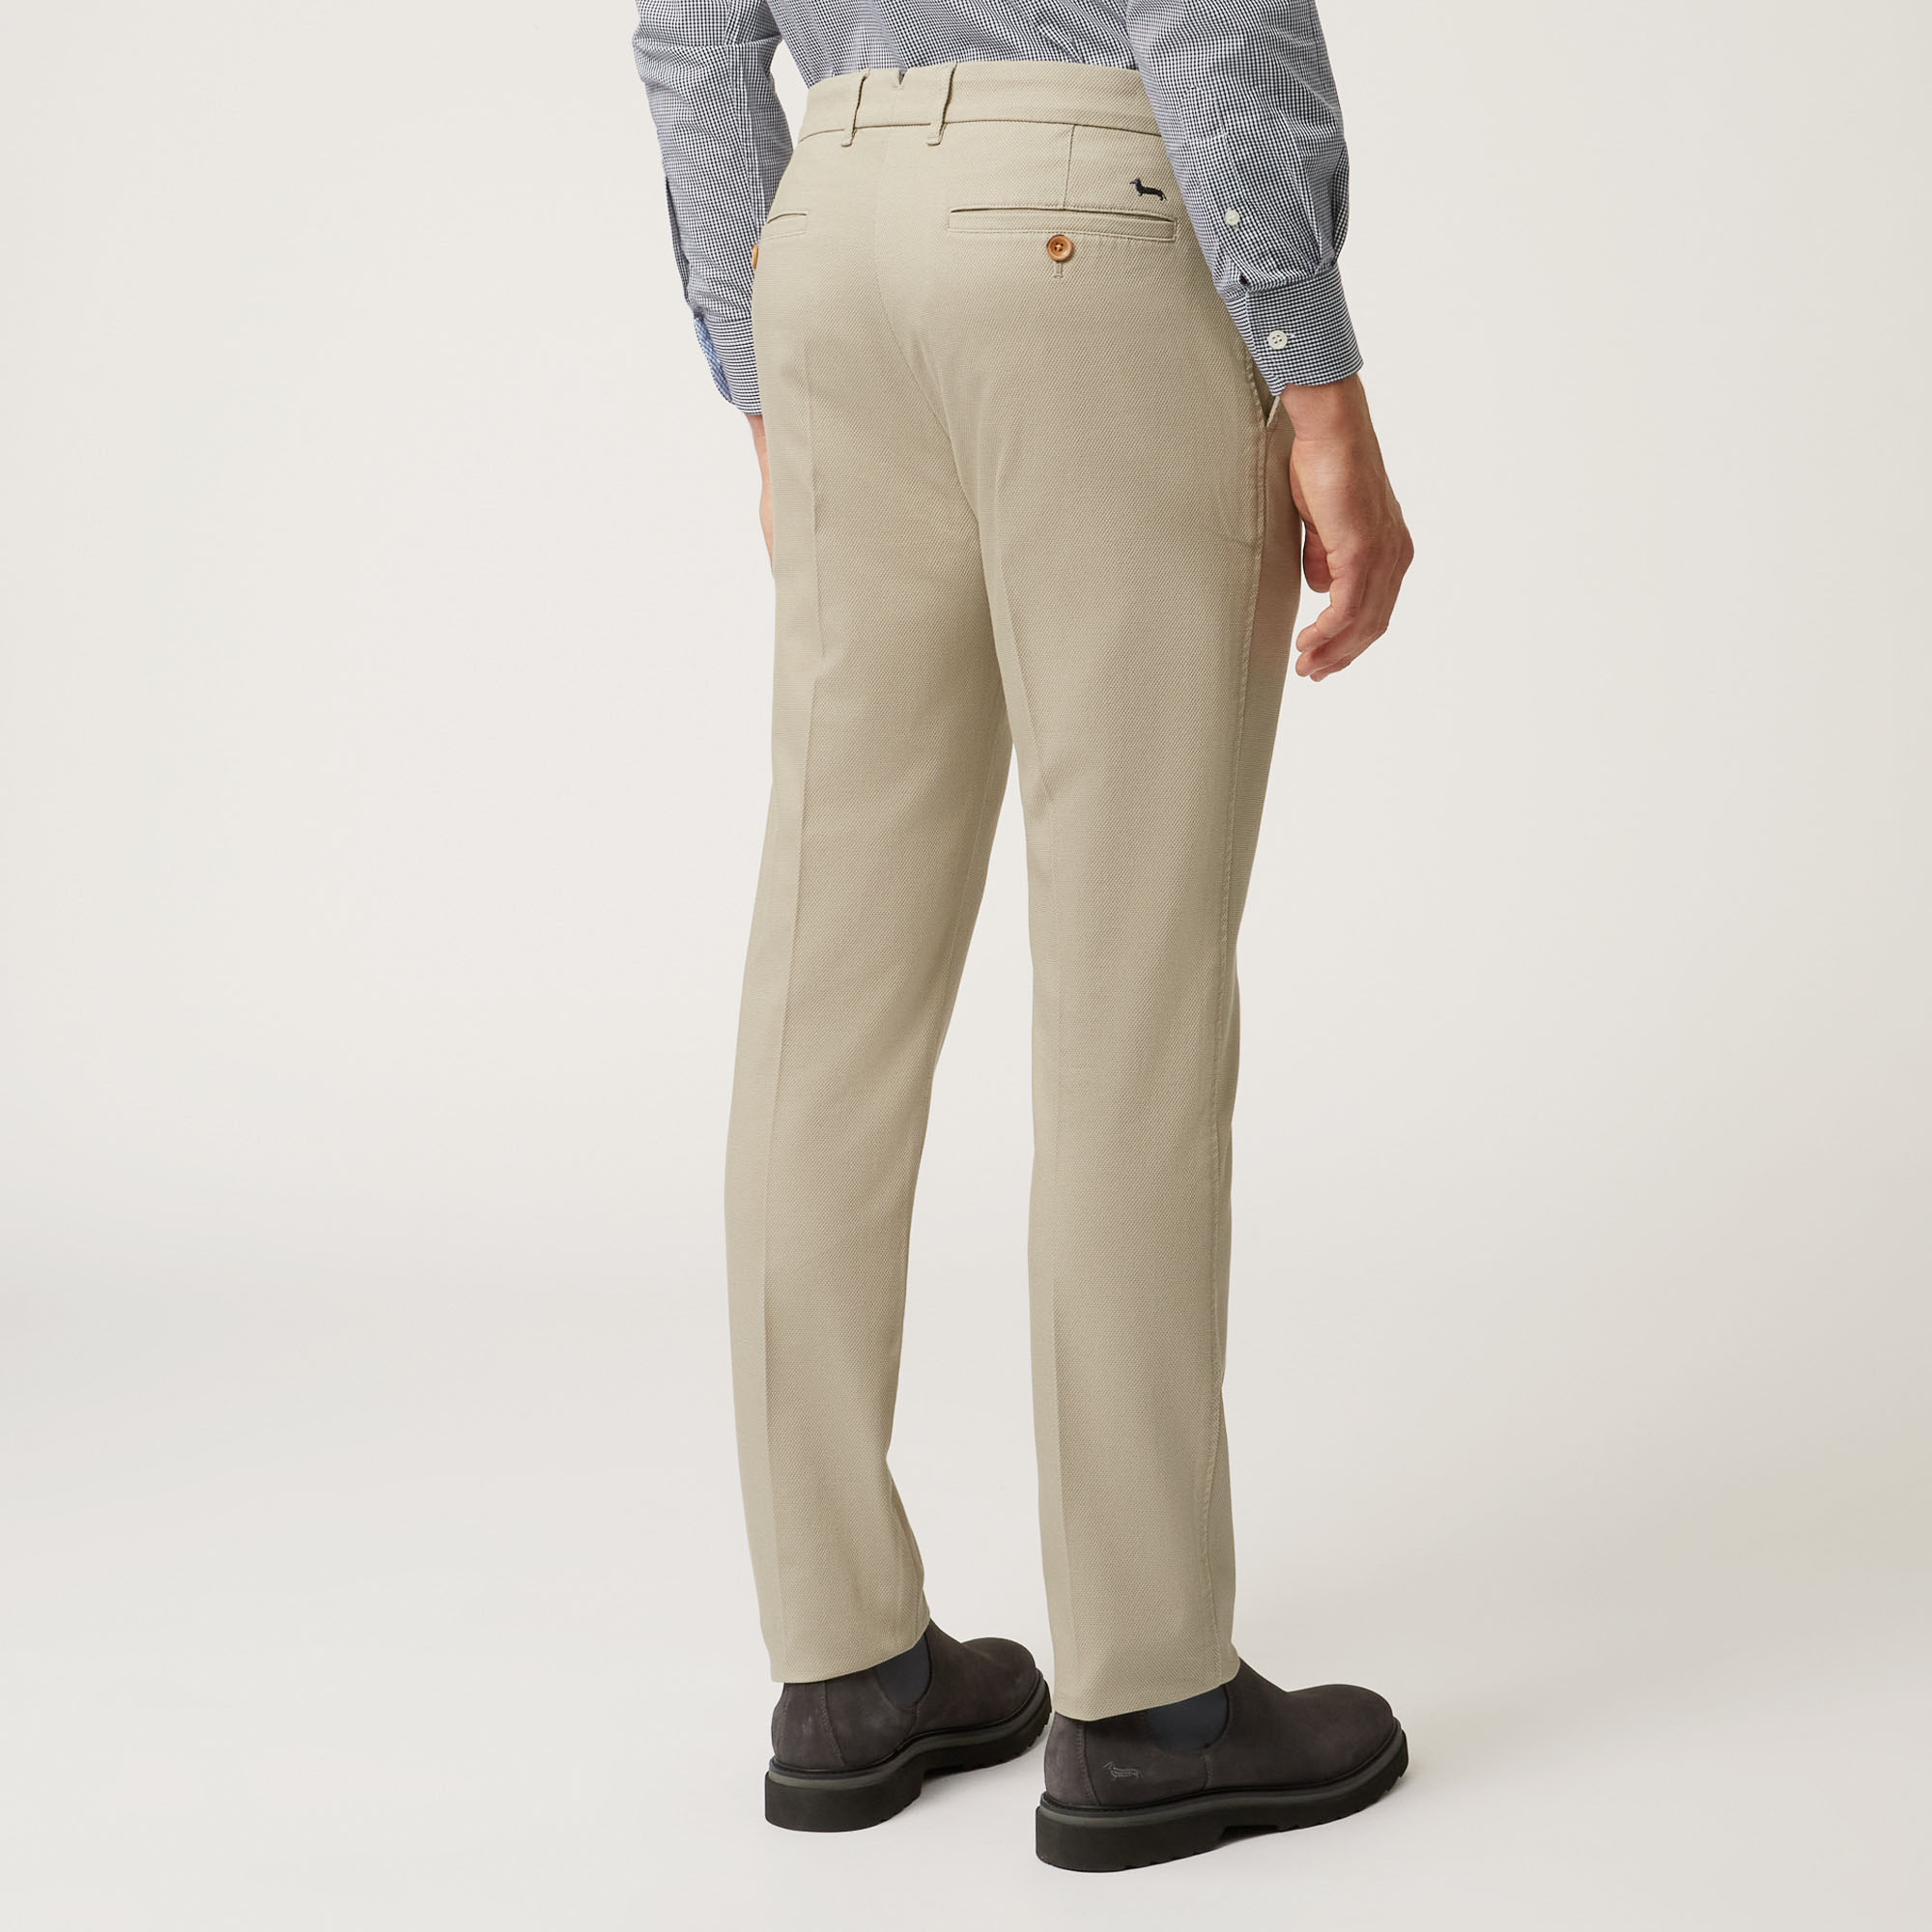 Pantalone Chino Narrow Fit In Cotone Stretch, Beige, large